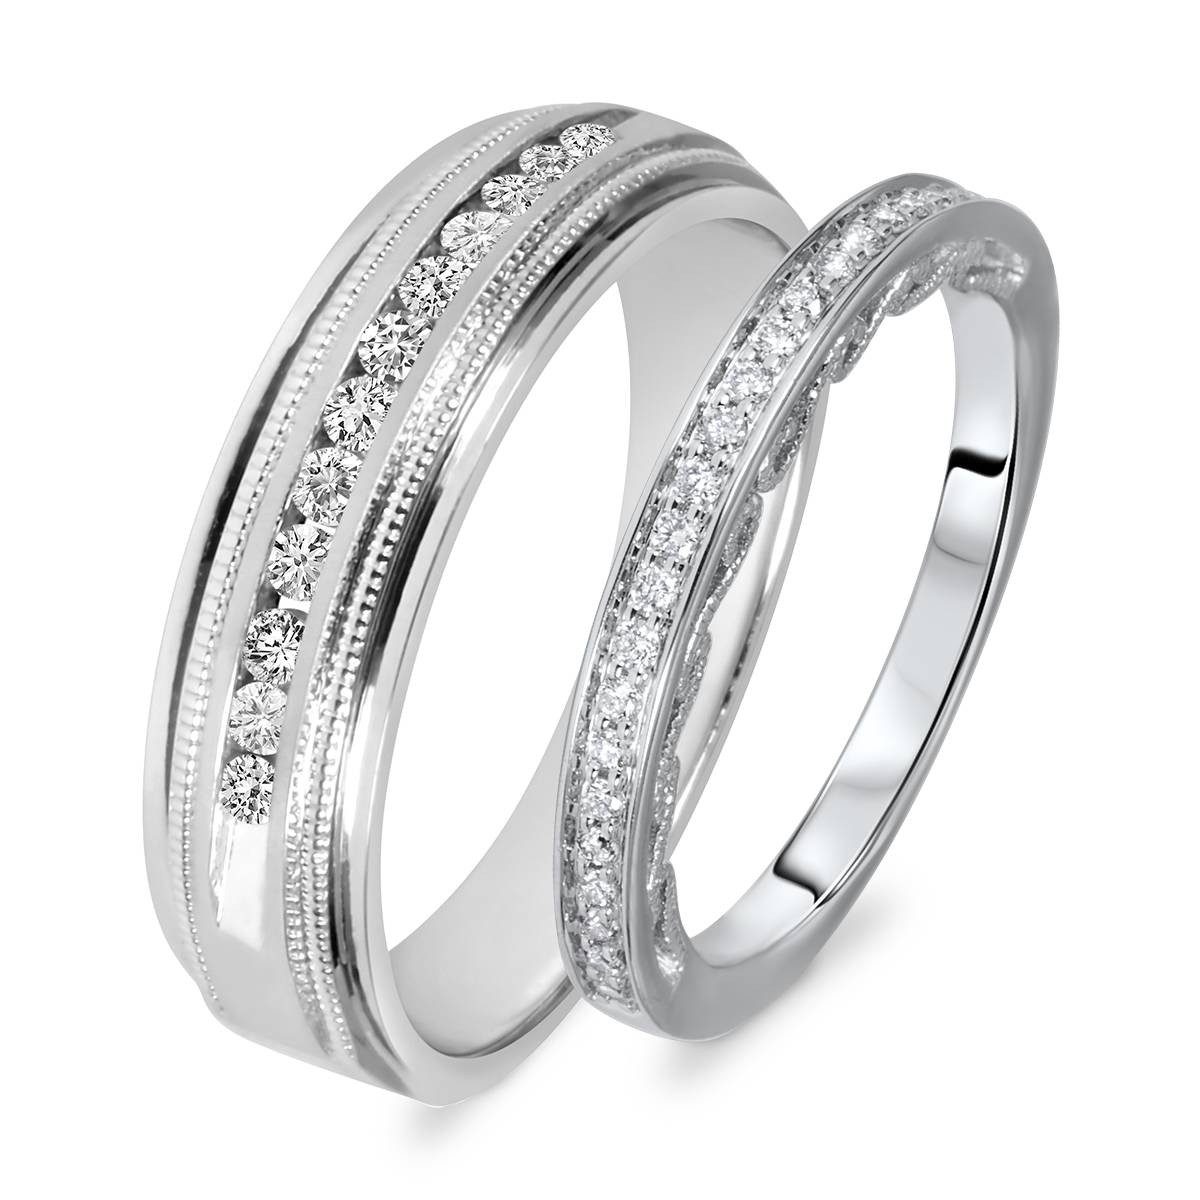 Cheap Wedding Band Sets His And Hers
 15 Inspirations of Cheap Wedding Bands Sets His And Hers